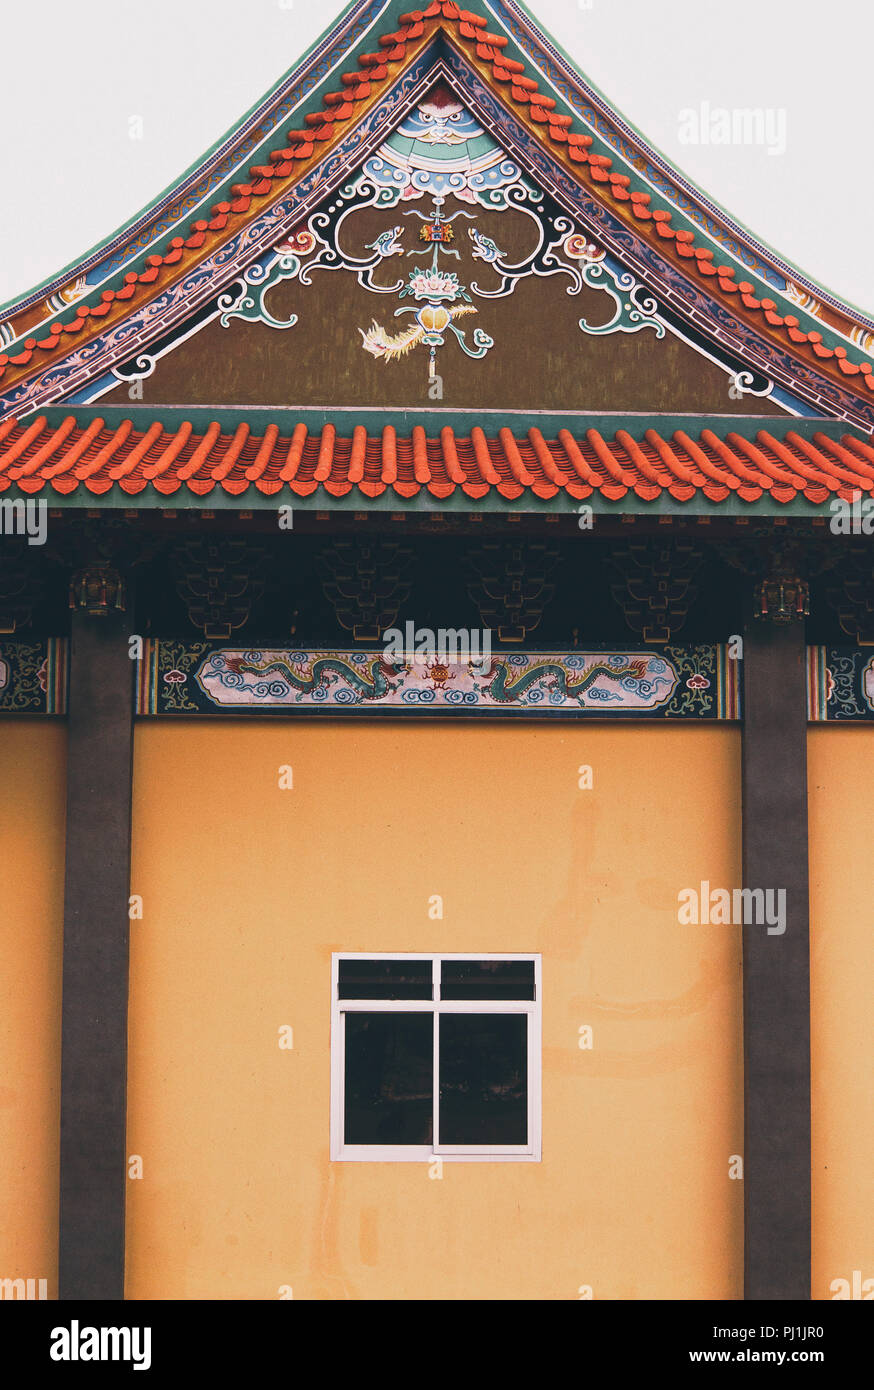 Chinese Temple, intricate details of a Chinese place of worship in Bali, Indonesia; religious architecture Stock Photo